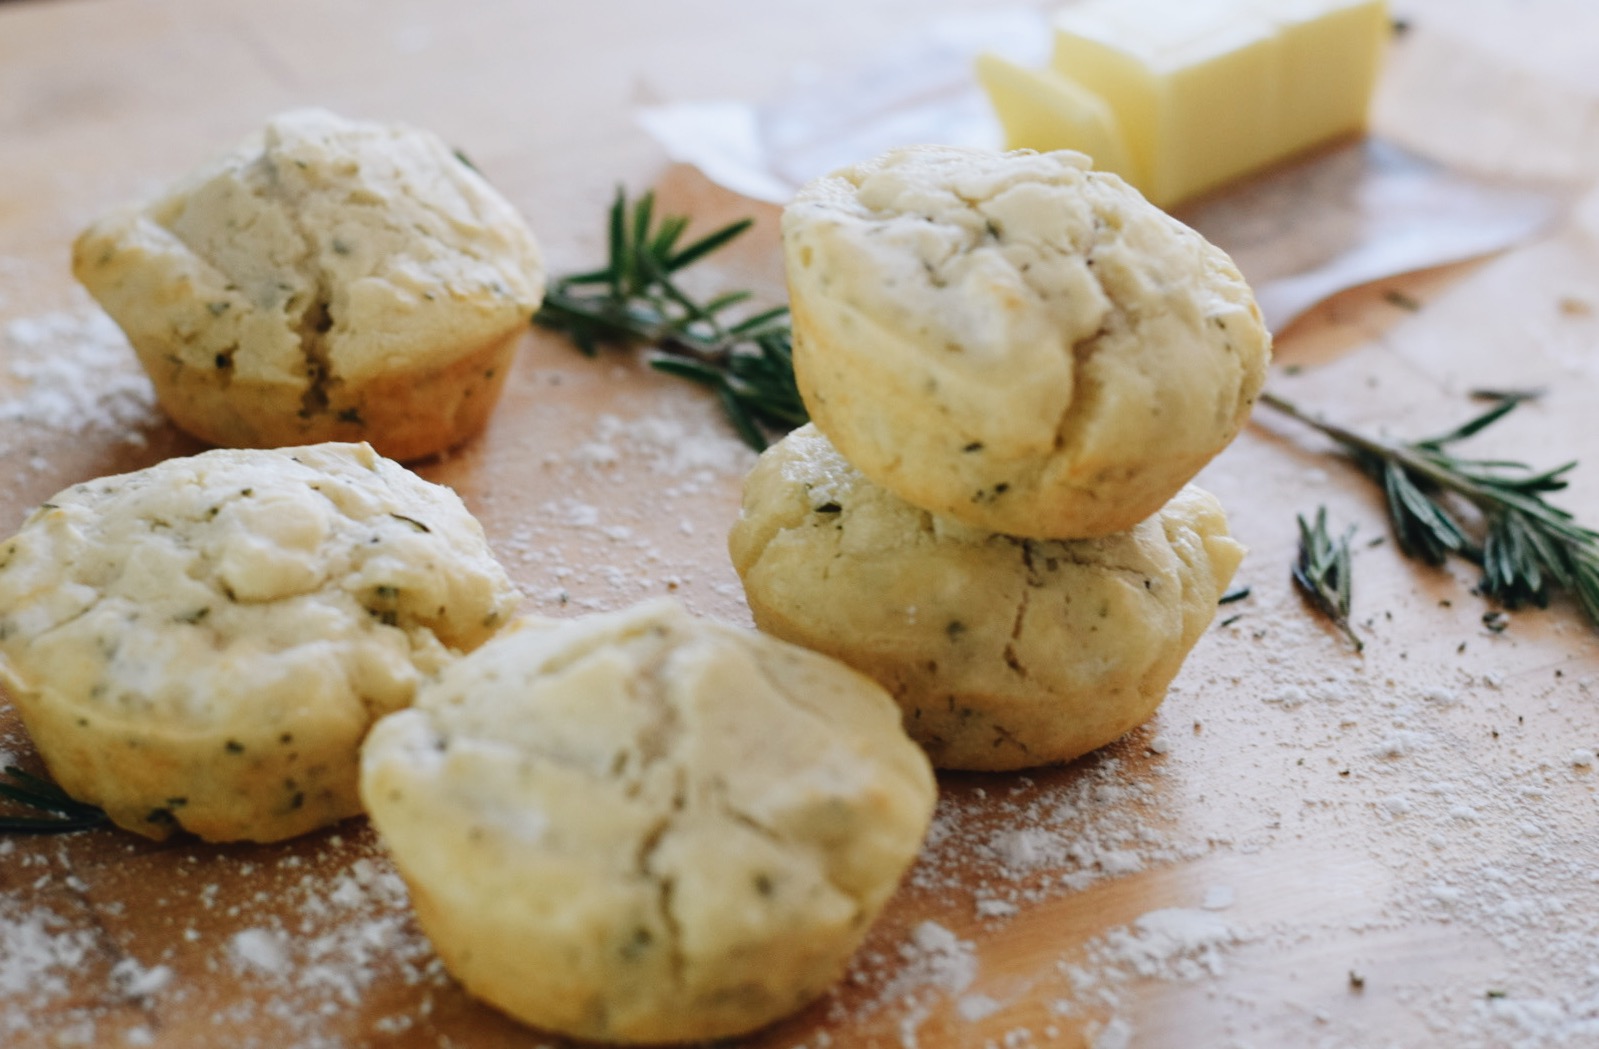 rosemary beer bread muffins on a wooden surface 